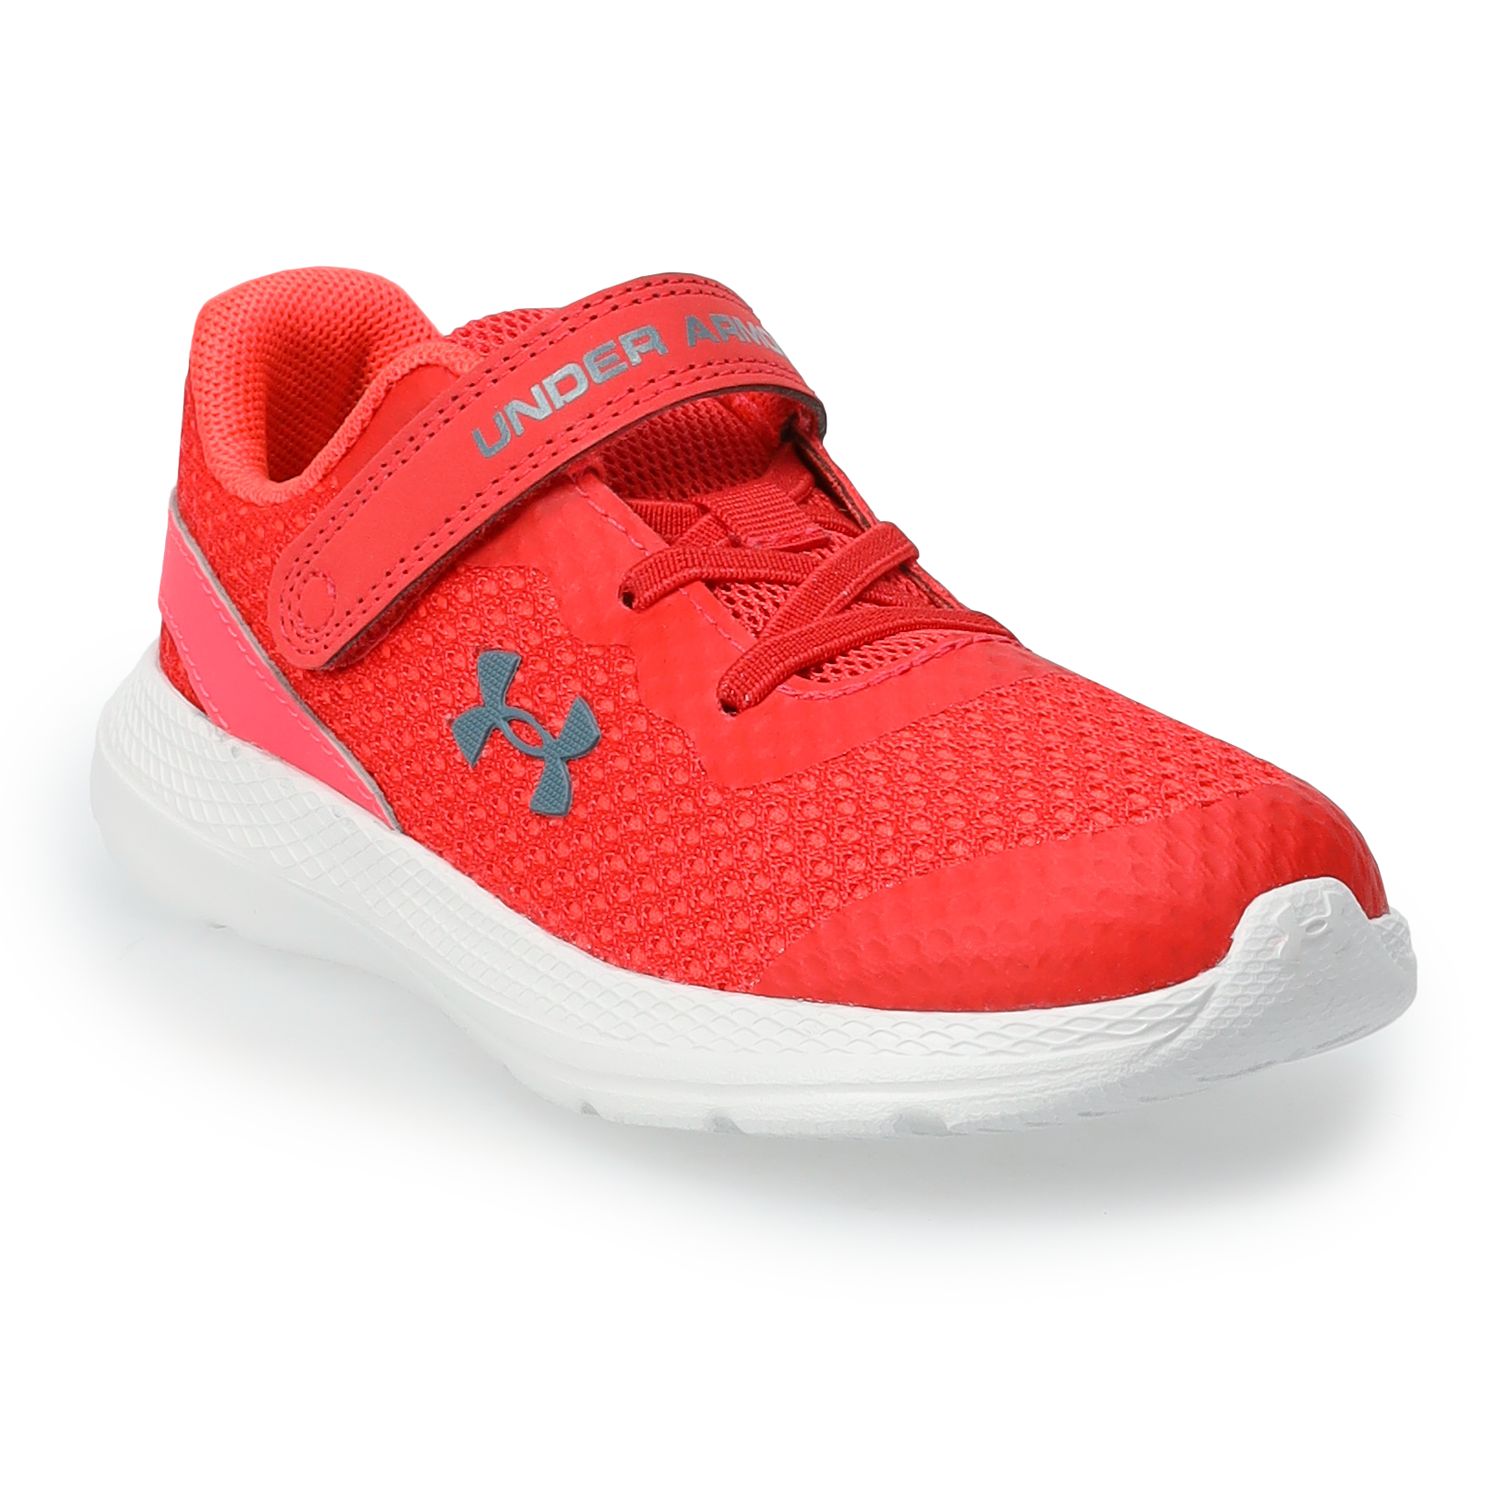 toddler size 5 under armour shoes